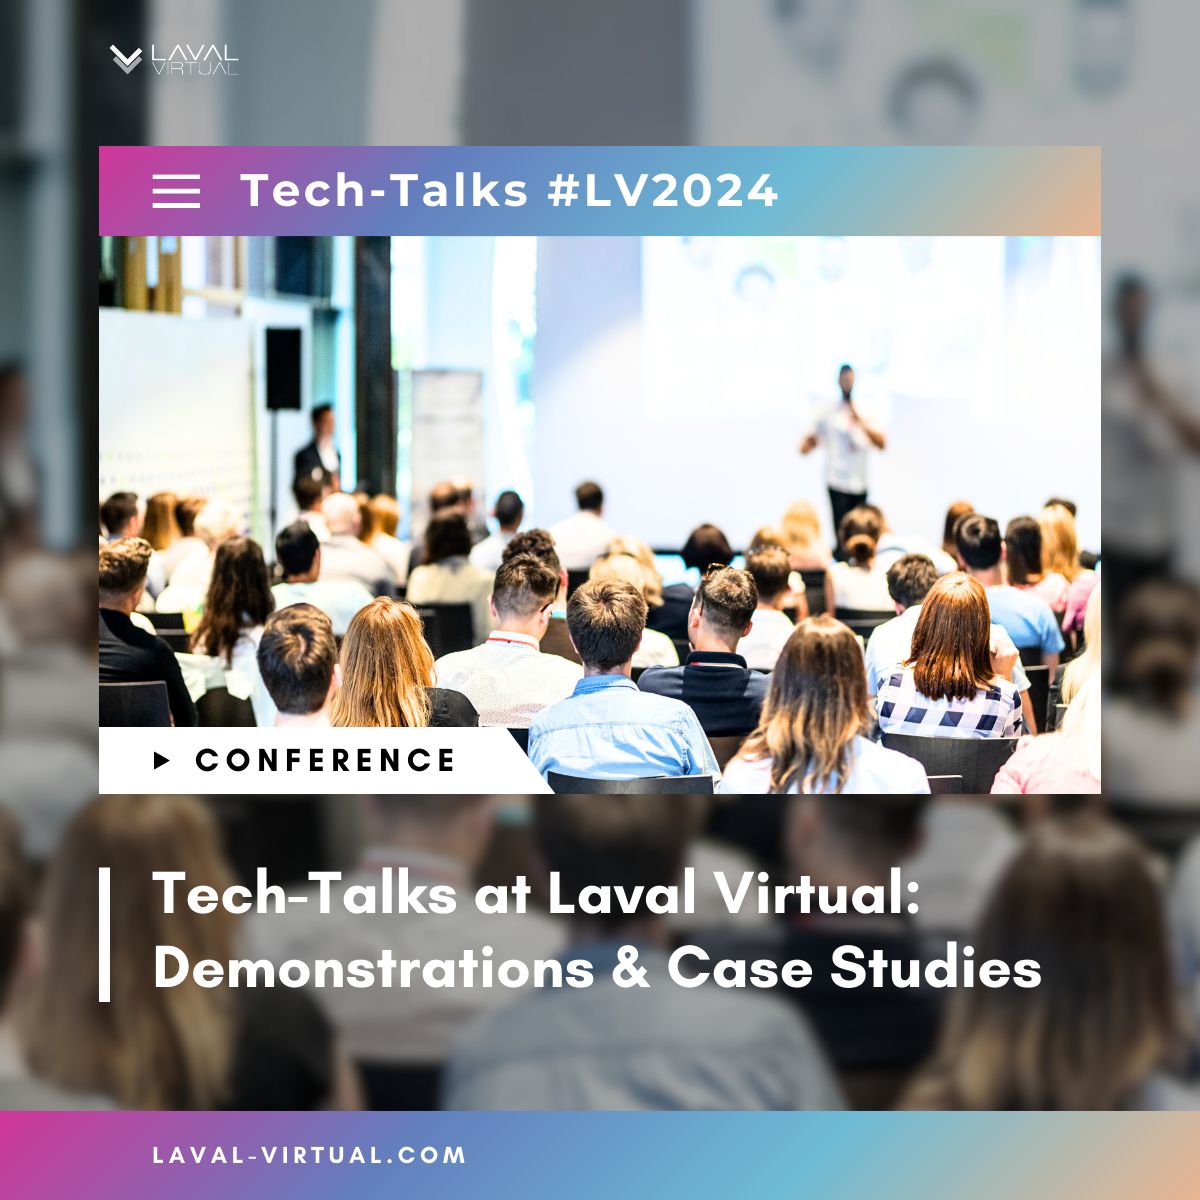 Join one of the top XR events from April 10–12 for Laval Virtual 2024! Hear a stellar panel with Yacine Ait Kaci, Dr. Angelina Dayton, Isabel De Peuter-Rutten, and Damien Van Achter as they explore how XR can bridge distances and shape a better future. laval-virtual.com